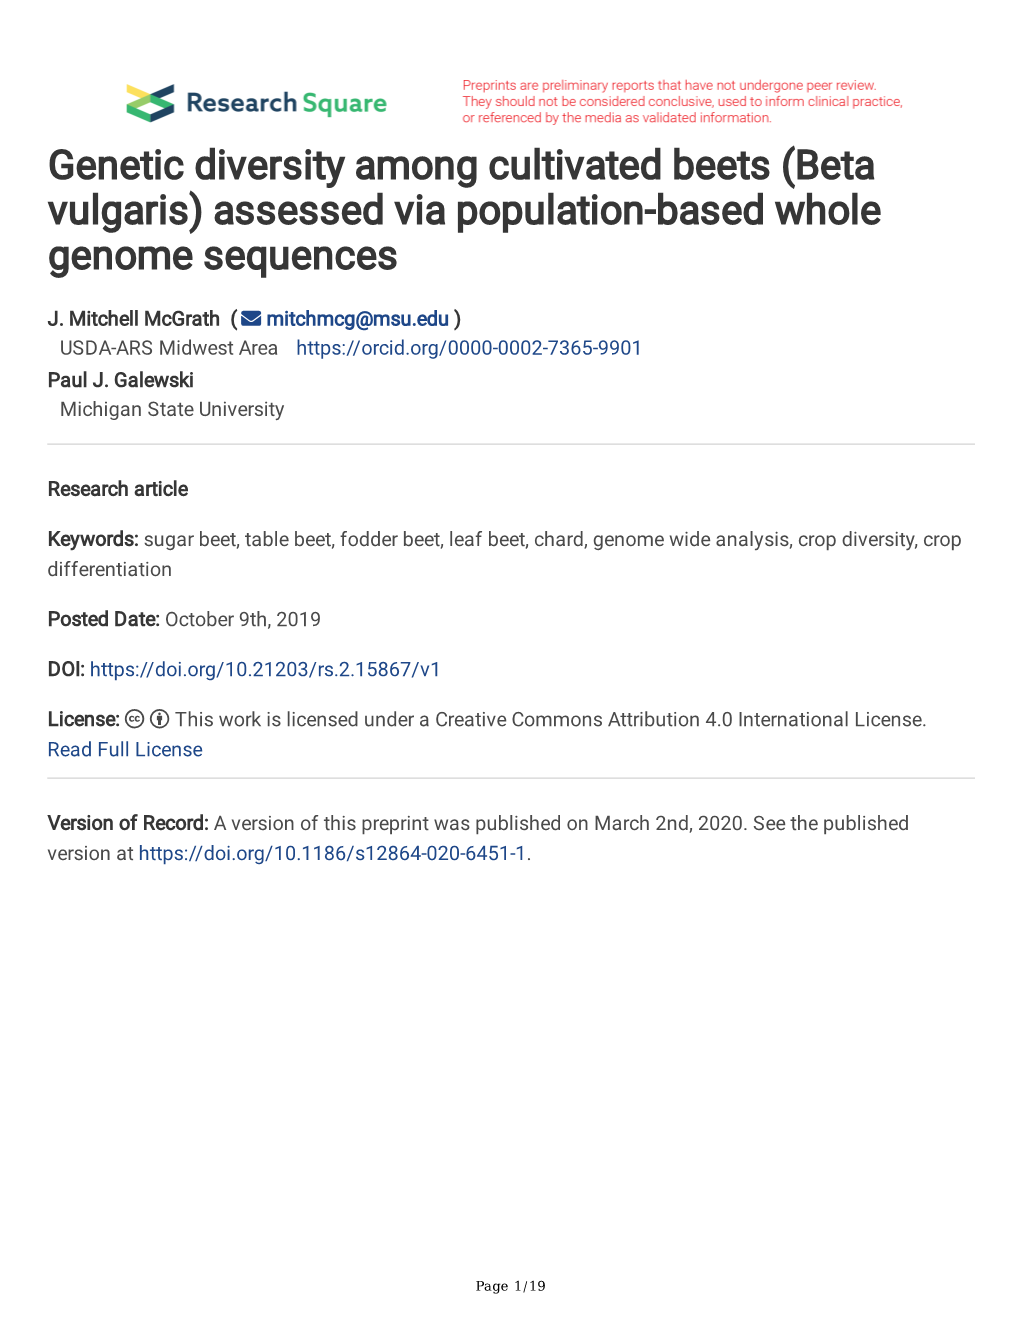 Genetic Diversity Among Cultivated Beets (Beta Vulgaris) Assessed Via Population-Based Whole Genome Sequences